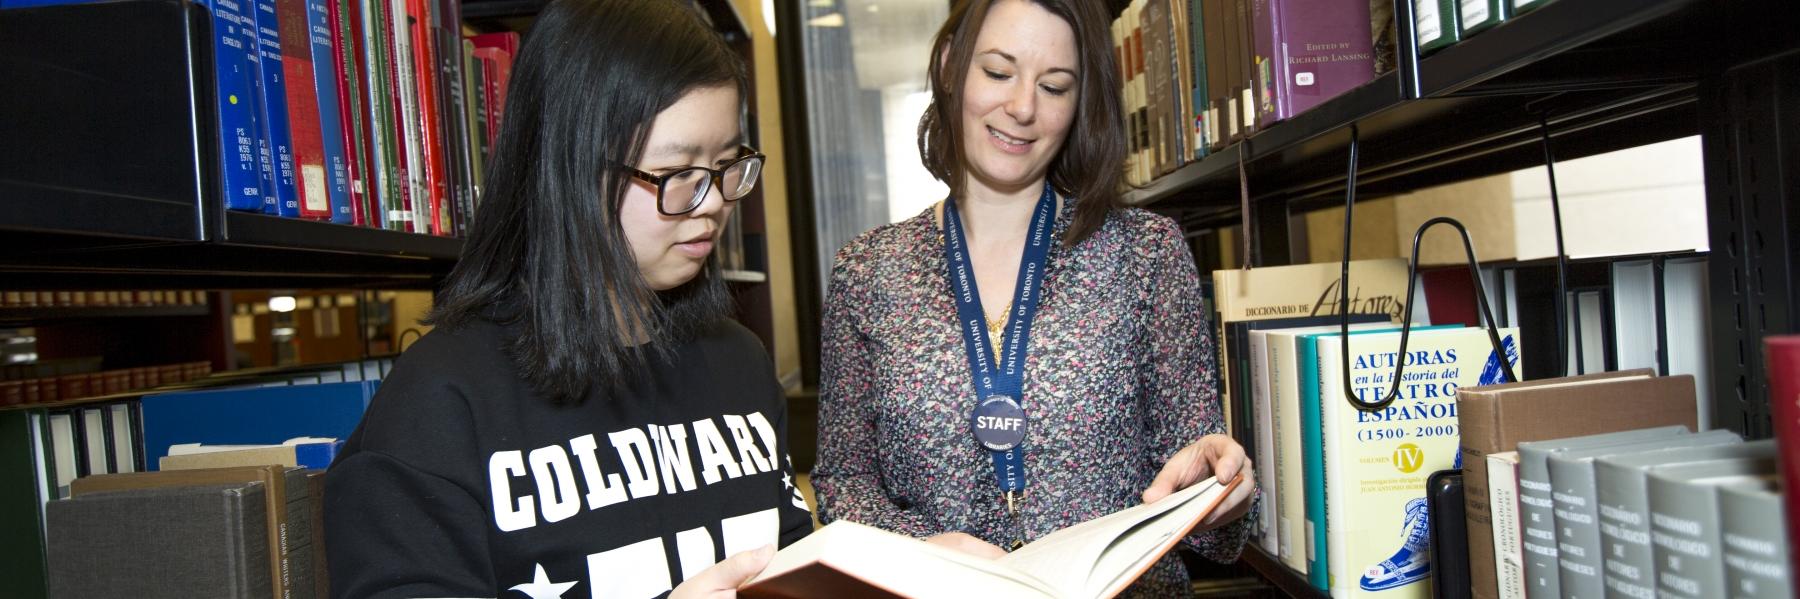 student in library with staff member